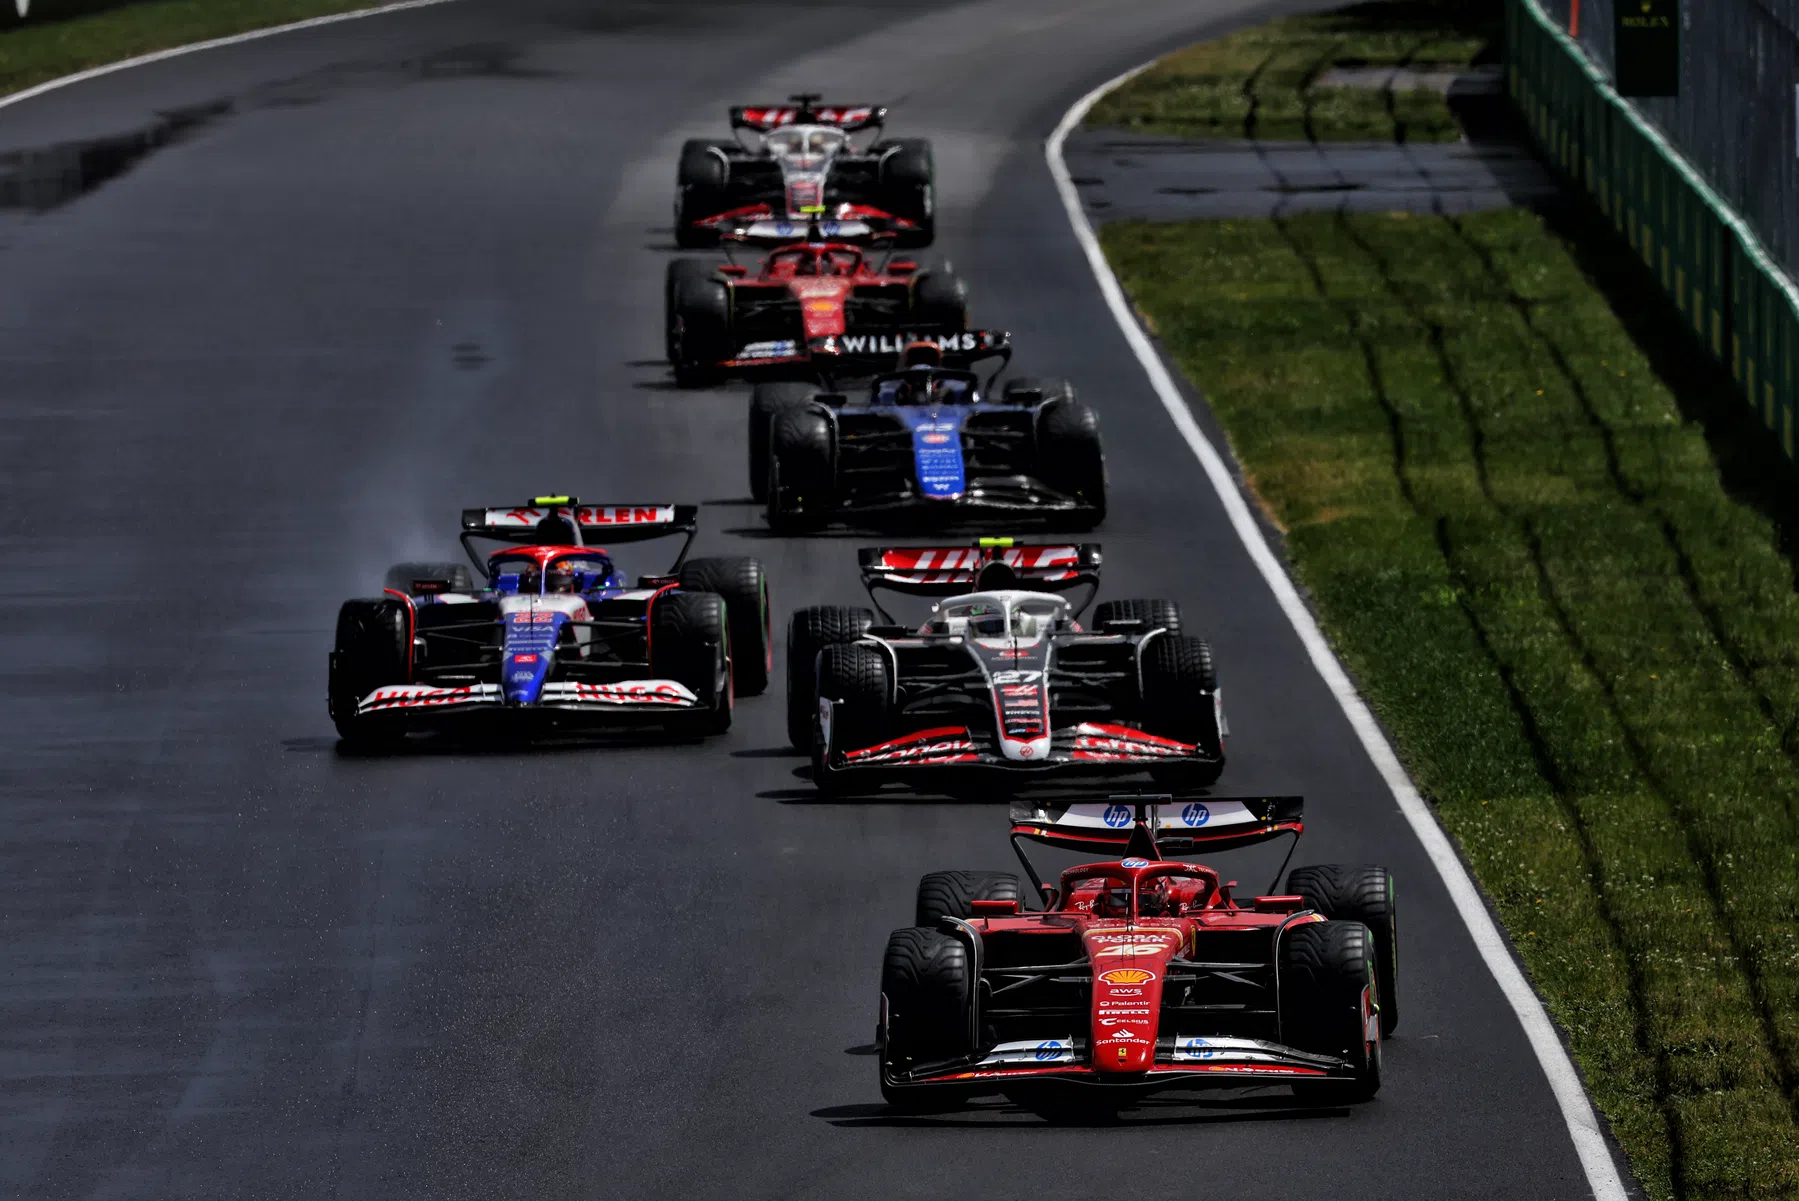 F1 cars possibly slower than F2 cars for 2026 season